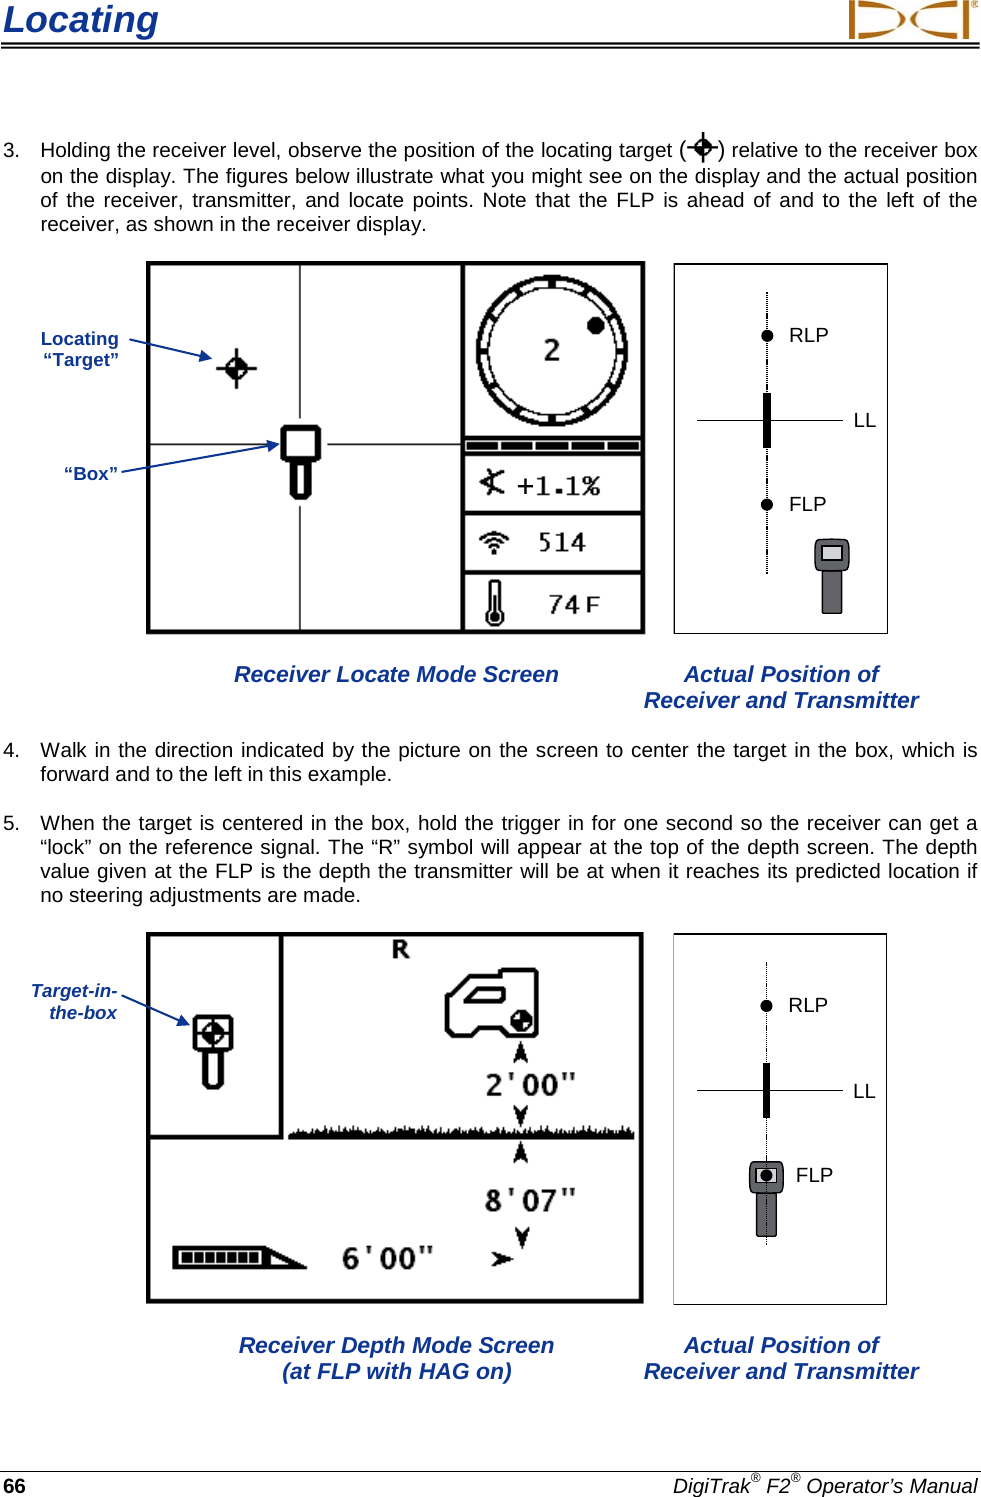 Locating     66 DigiTrak® F2® Operator’s Manual 3. Holding the receiver level, observe the position of the locating target ( ) relative to the receiver box on the display. The figures below illustrate what you might see on the display and the actual position of the receiver, transmitter, and locate points. Note that the FLP is ahead of and to the left of the receiver, as shown in the receiver display.   RLPFLPLL  Receiver Locate Mode Screen Actual Position of        Receiver and Transmitter 4. Walk in the direction indicated by the picture on the screen to center the target in the box, which is forward and to the left in this example. 5. When the target is centered in the box, hold the trigger in for one second so the receiver can get a “lock” on the reference signal. The “R” symbol will appear at the top of the depth screen. The depth value given at the FLP is the depth the transmitter will be at when it reaches its predicted location if no steering adjustments are made.    RLPFLPLL  Receiver Depth Mode Screen Actual Position of     (at FLP with HAG on) Receiver and Transmitter Locating “Target” “Box” Target-in-the-box  + 